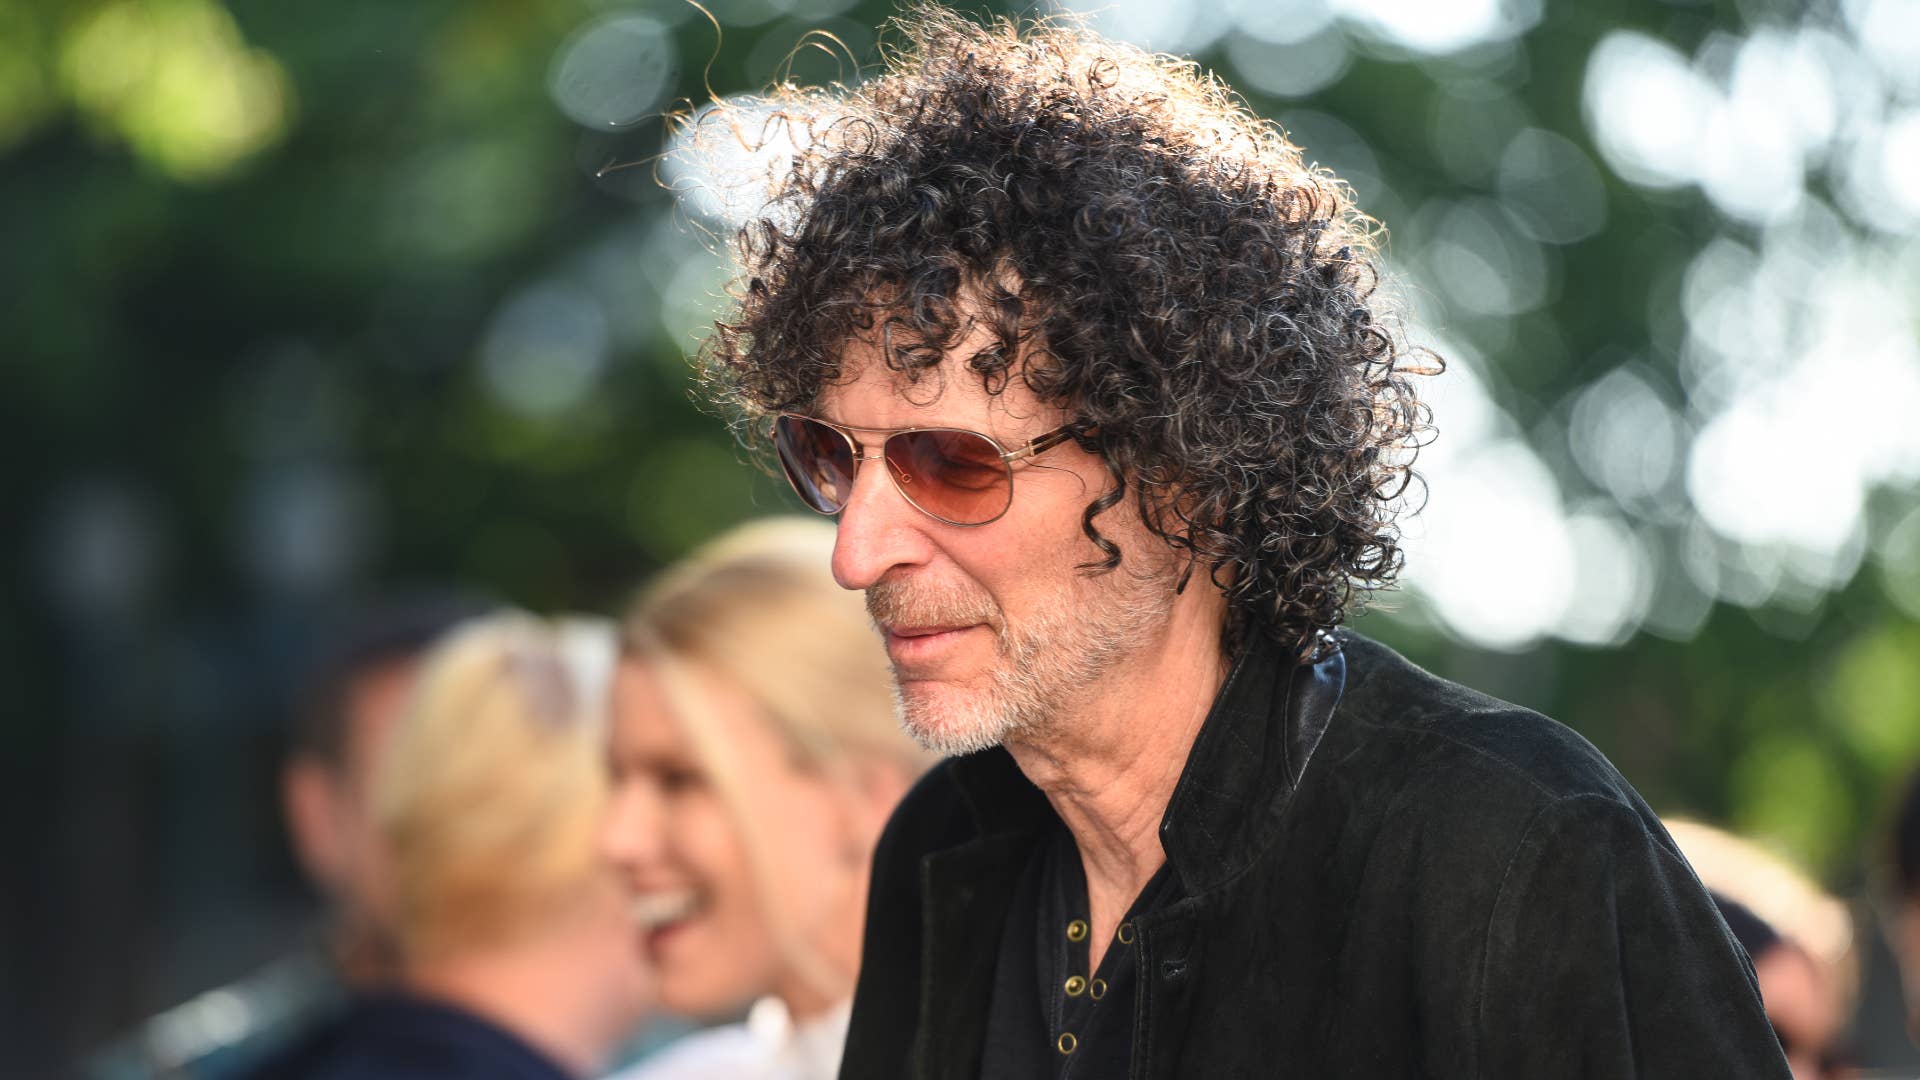 Howard Stern is pictured wearing tinted glasses